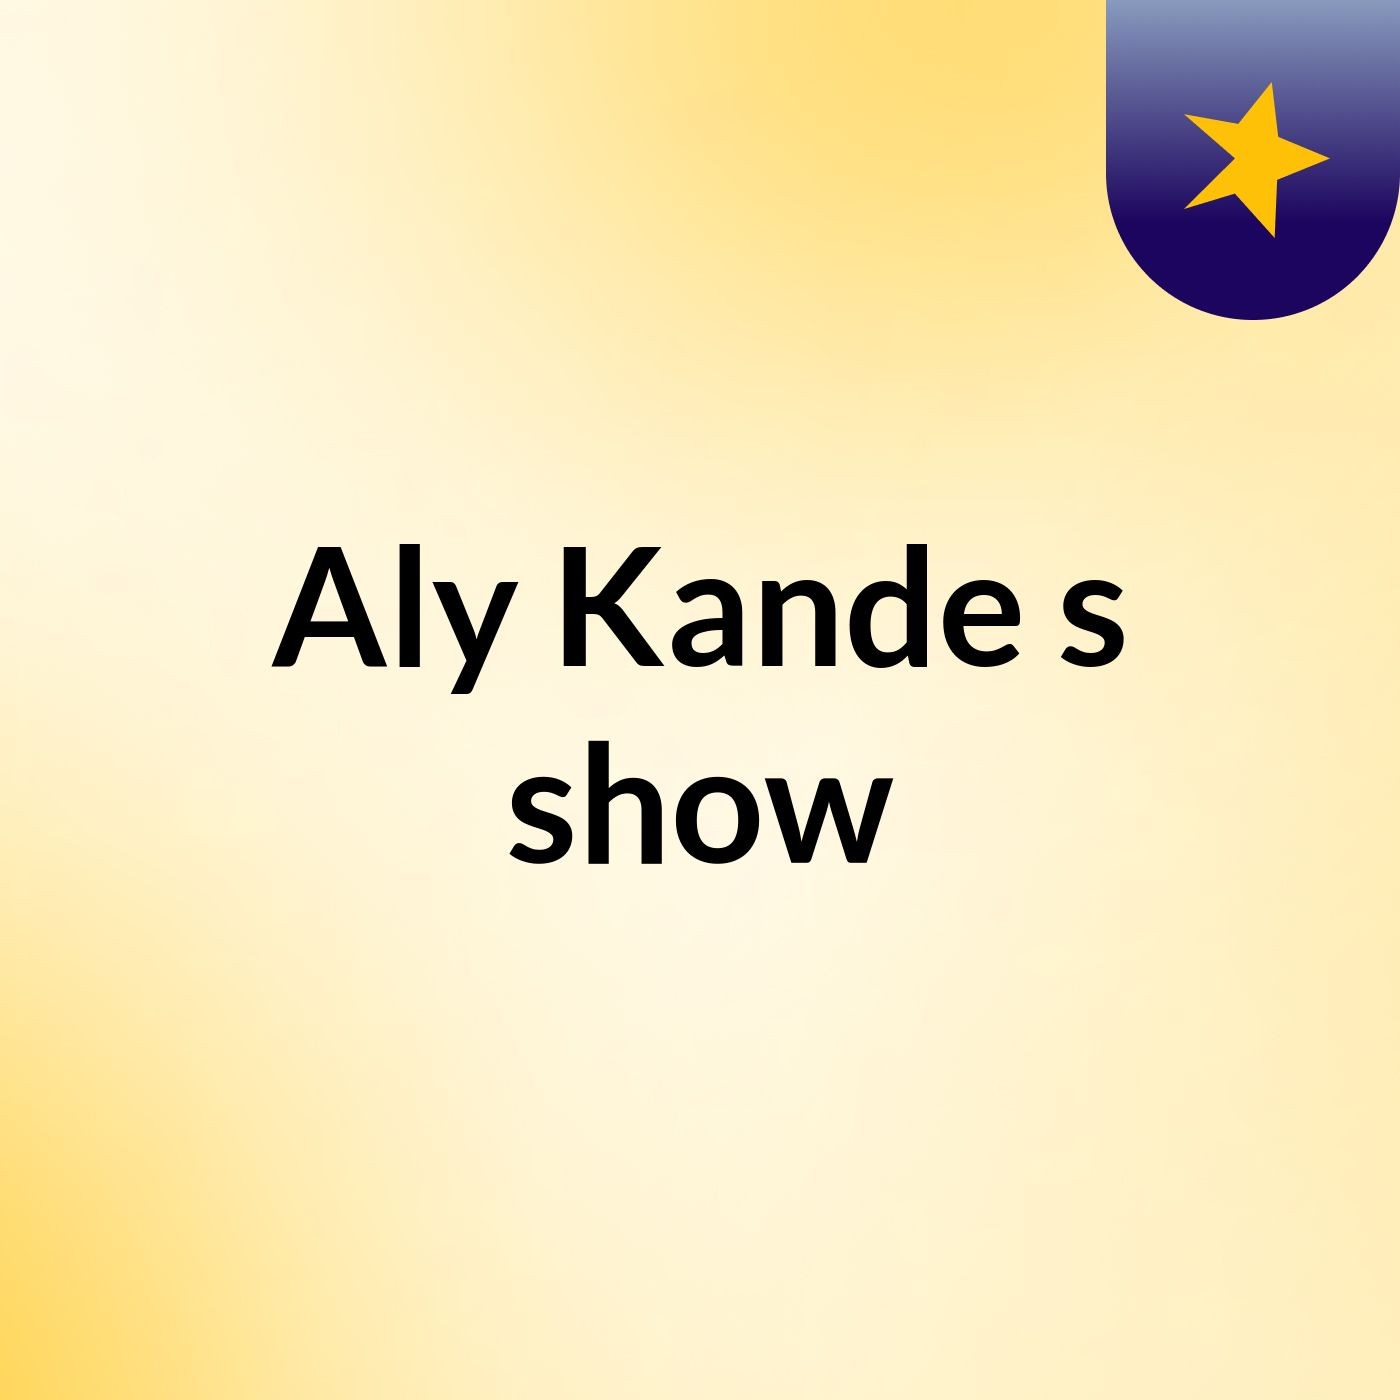 Aly Kande's show